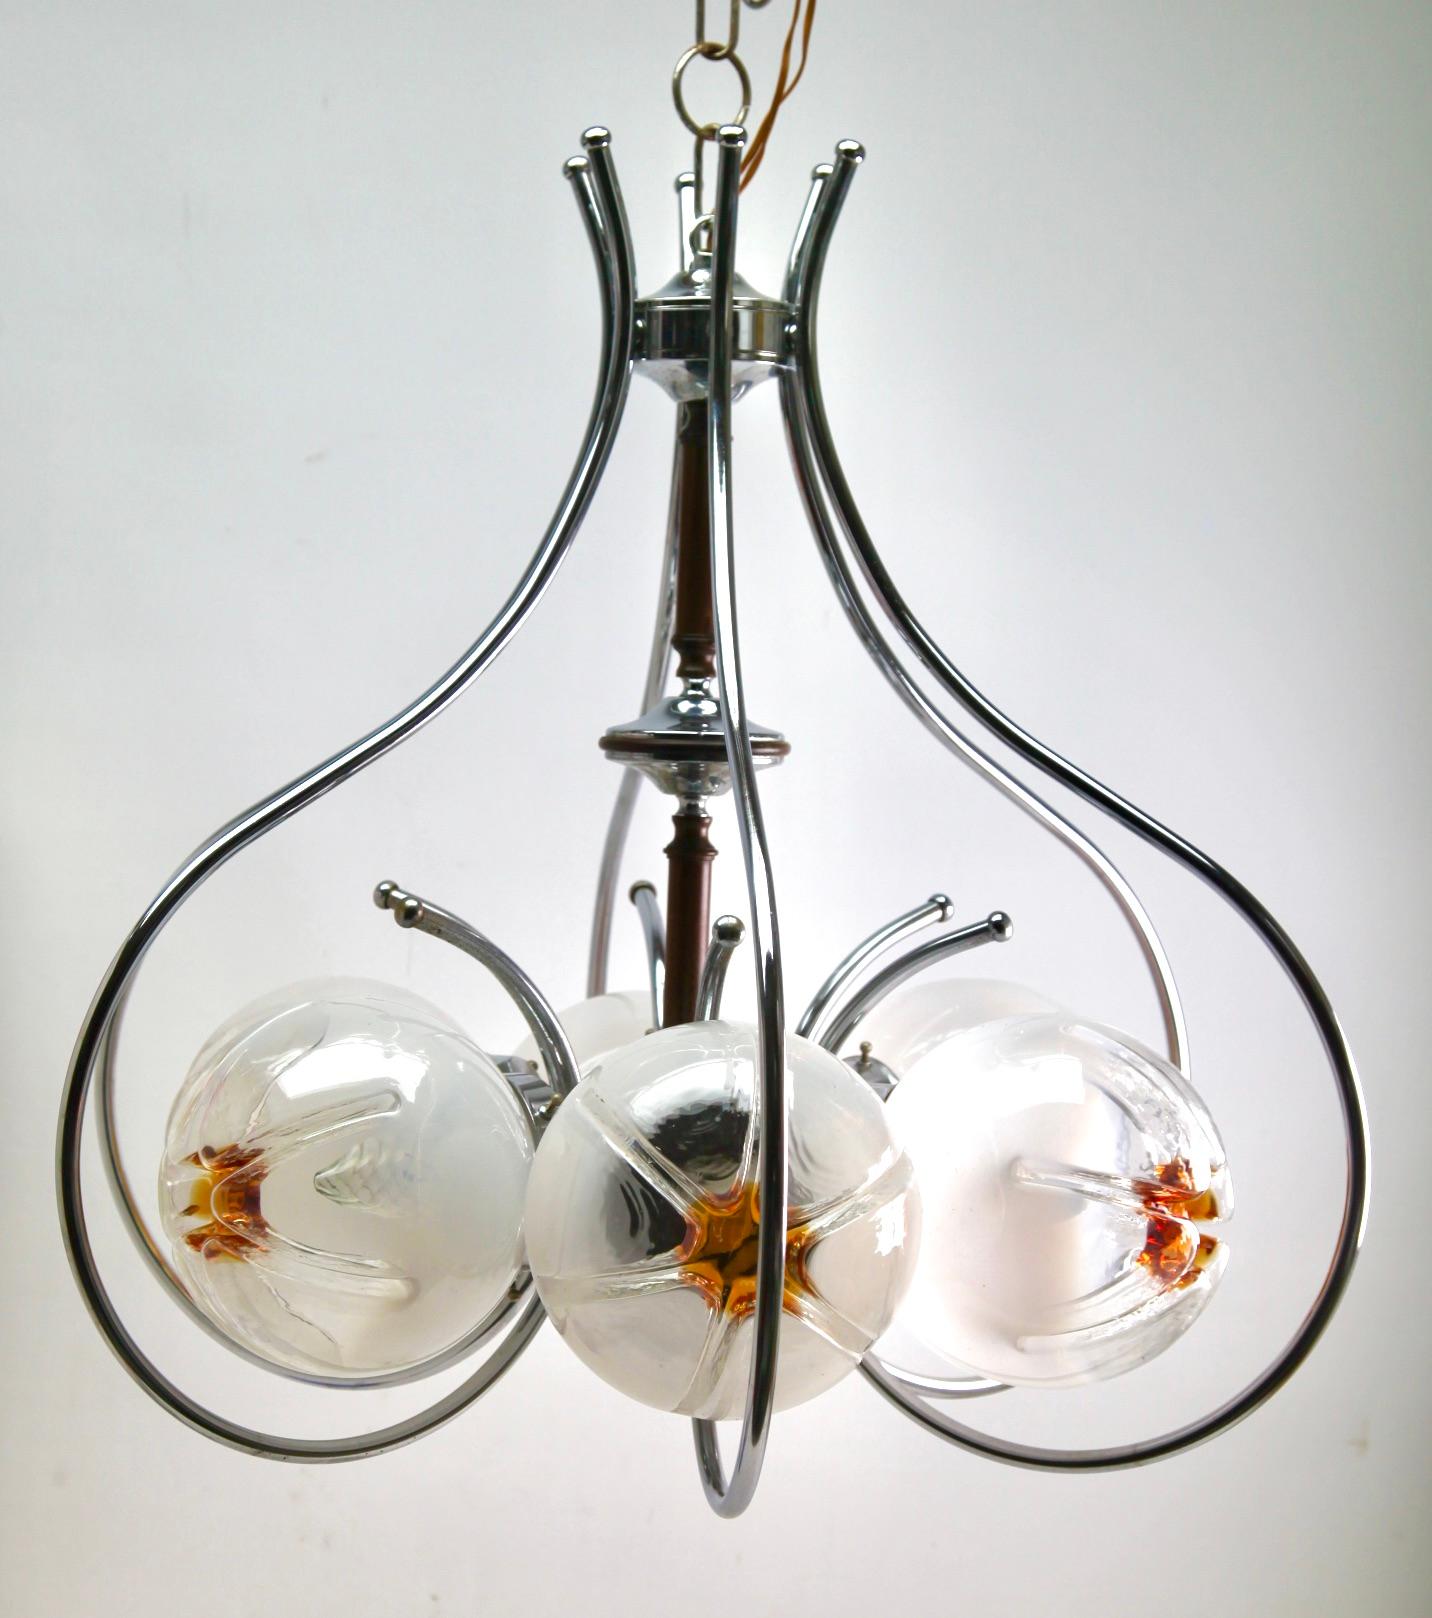 Pendant with a globe of clear glass with orange inclusions, Italy, 1970 by Mazzega.
Casting a beautiful rippled light across a wall and ceiling.

The lamp works everywhere in the World

Recently cleaned and polished so that it in excellent